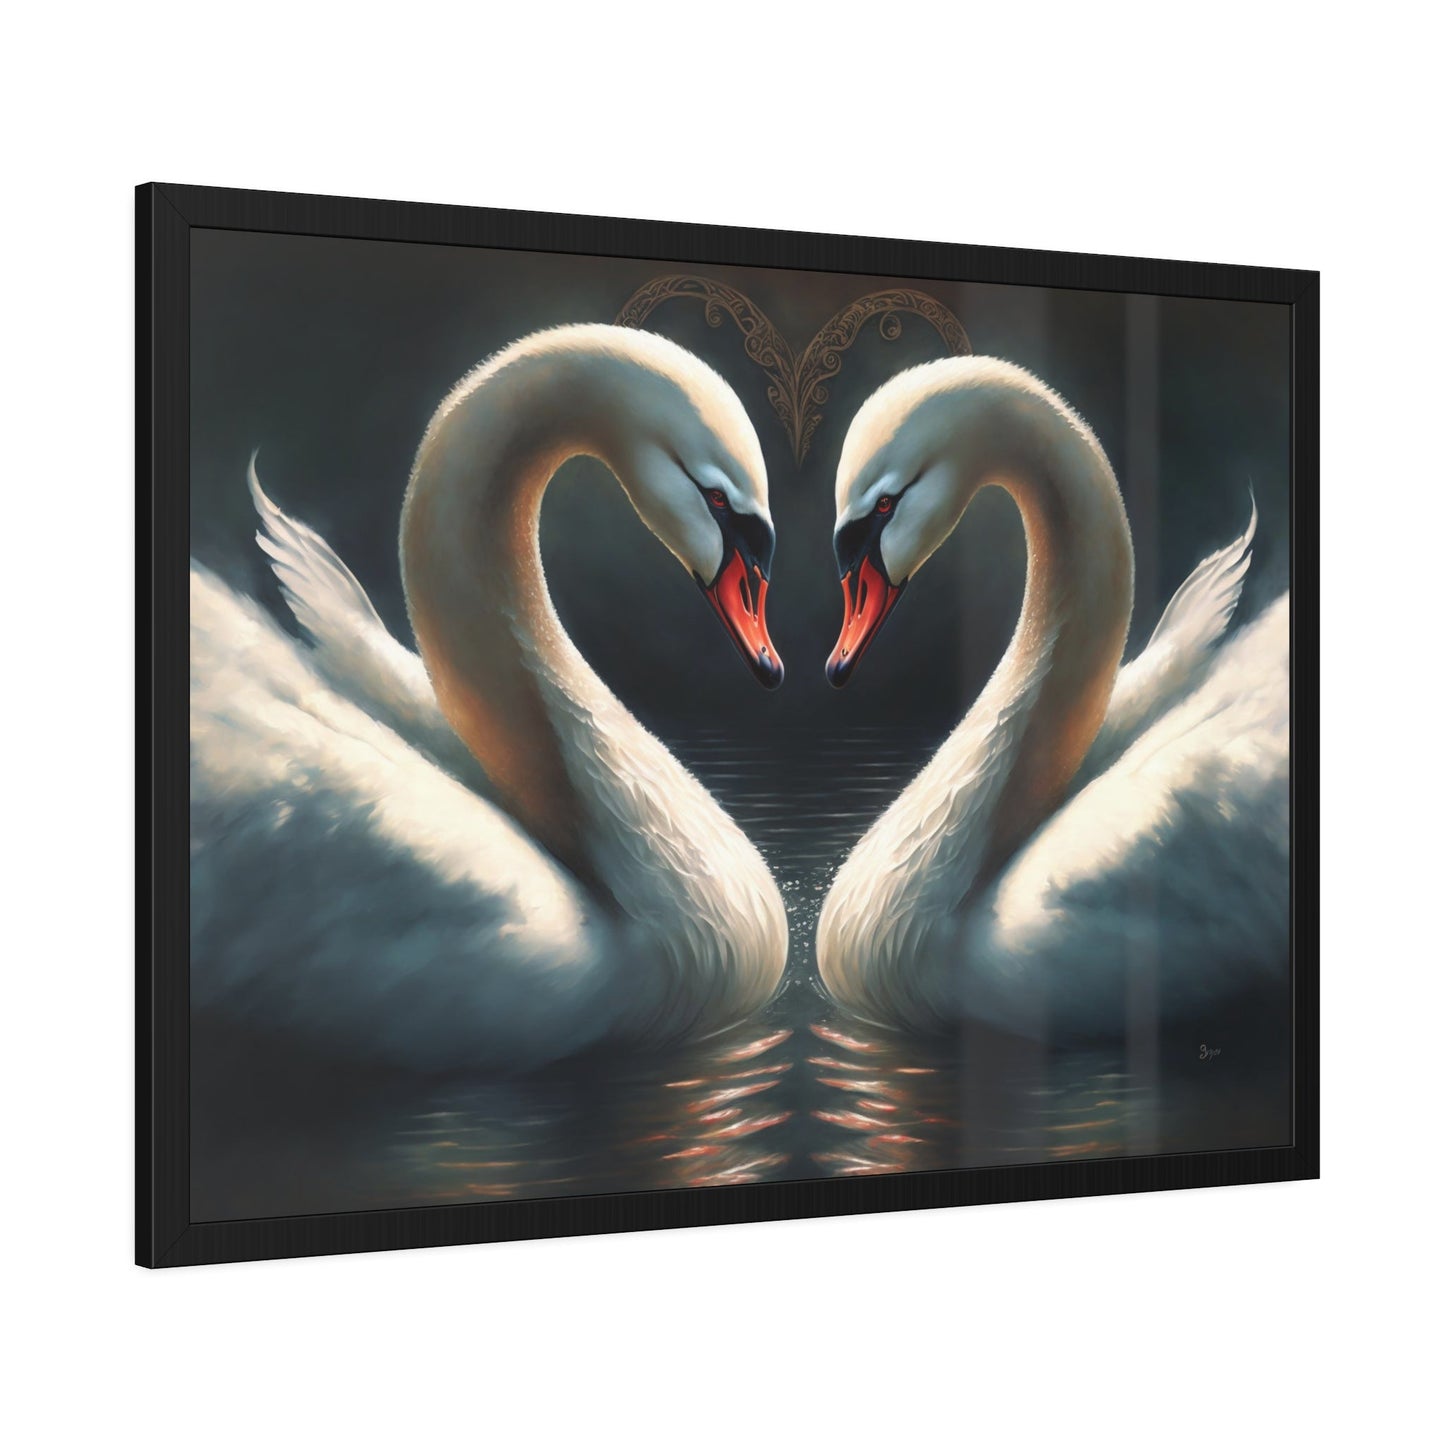 Natural Canvas & Poster Print of Swans in a Calm Setting